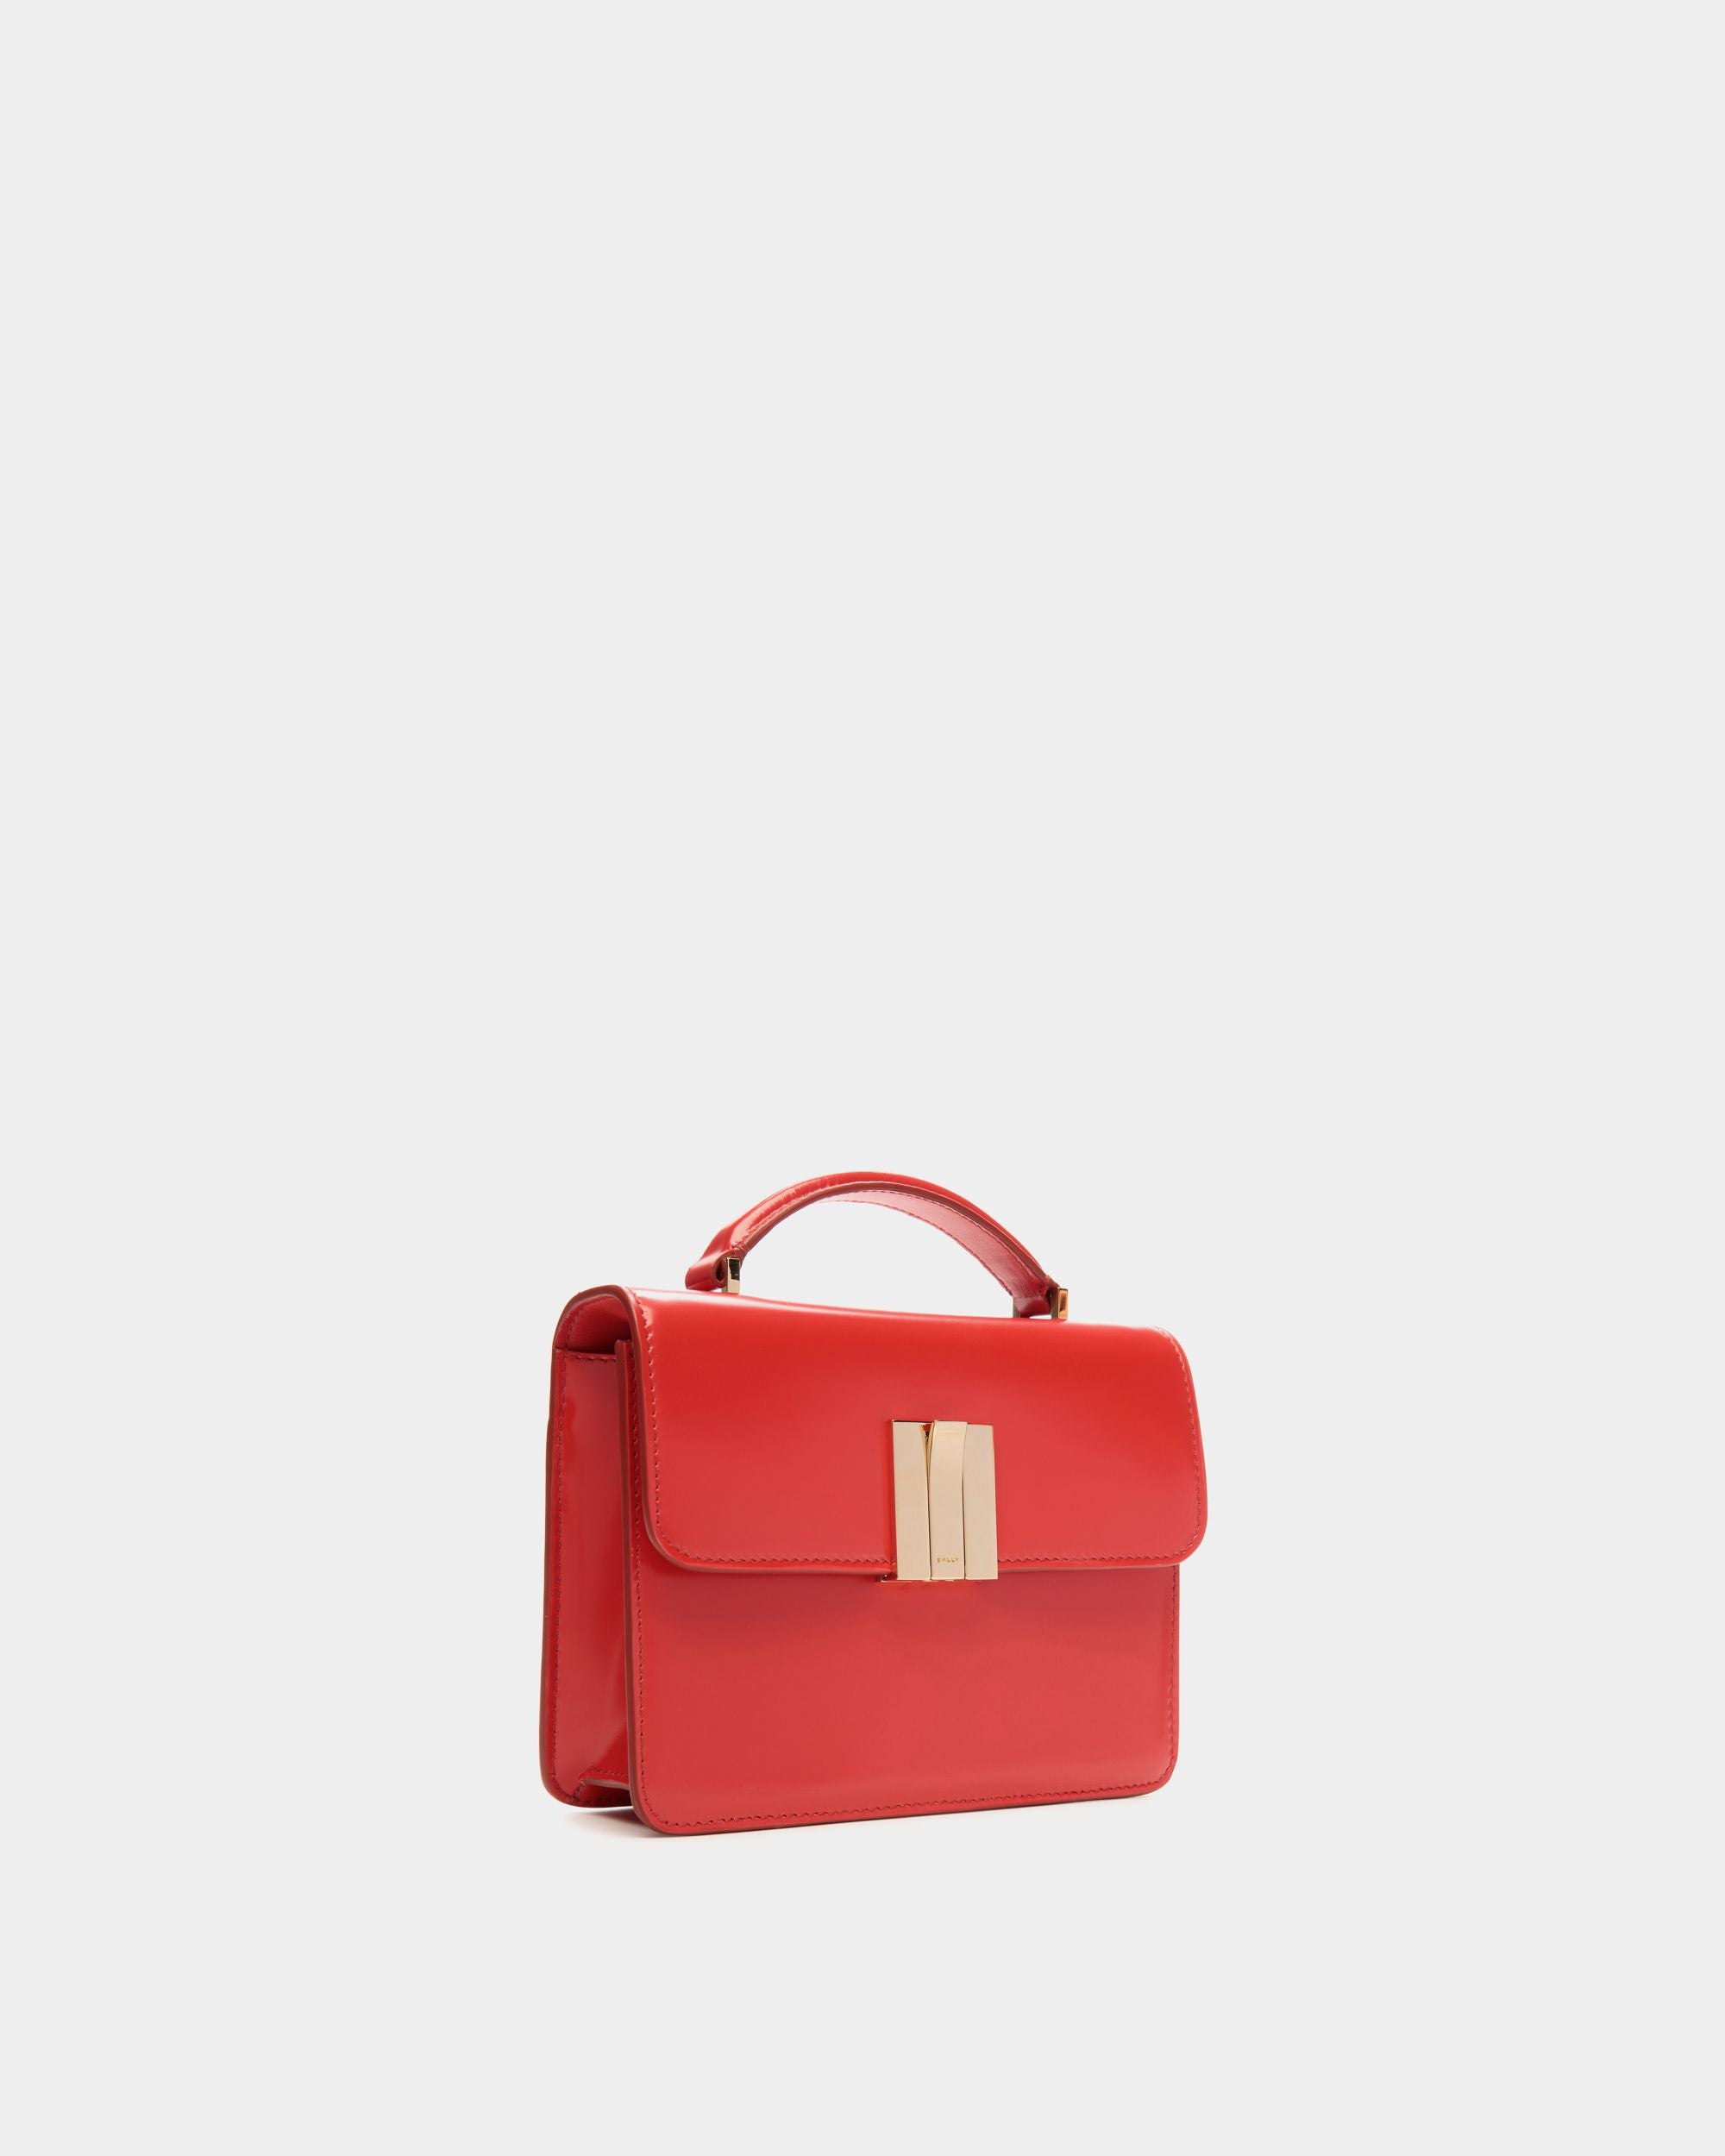 Women's Ollam Mini Top Handle Bag in Candy Red Brushed Leather | Bally | Still Life 3/4 Front